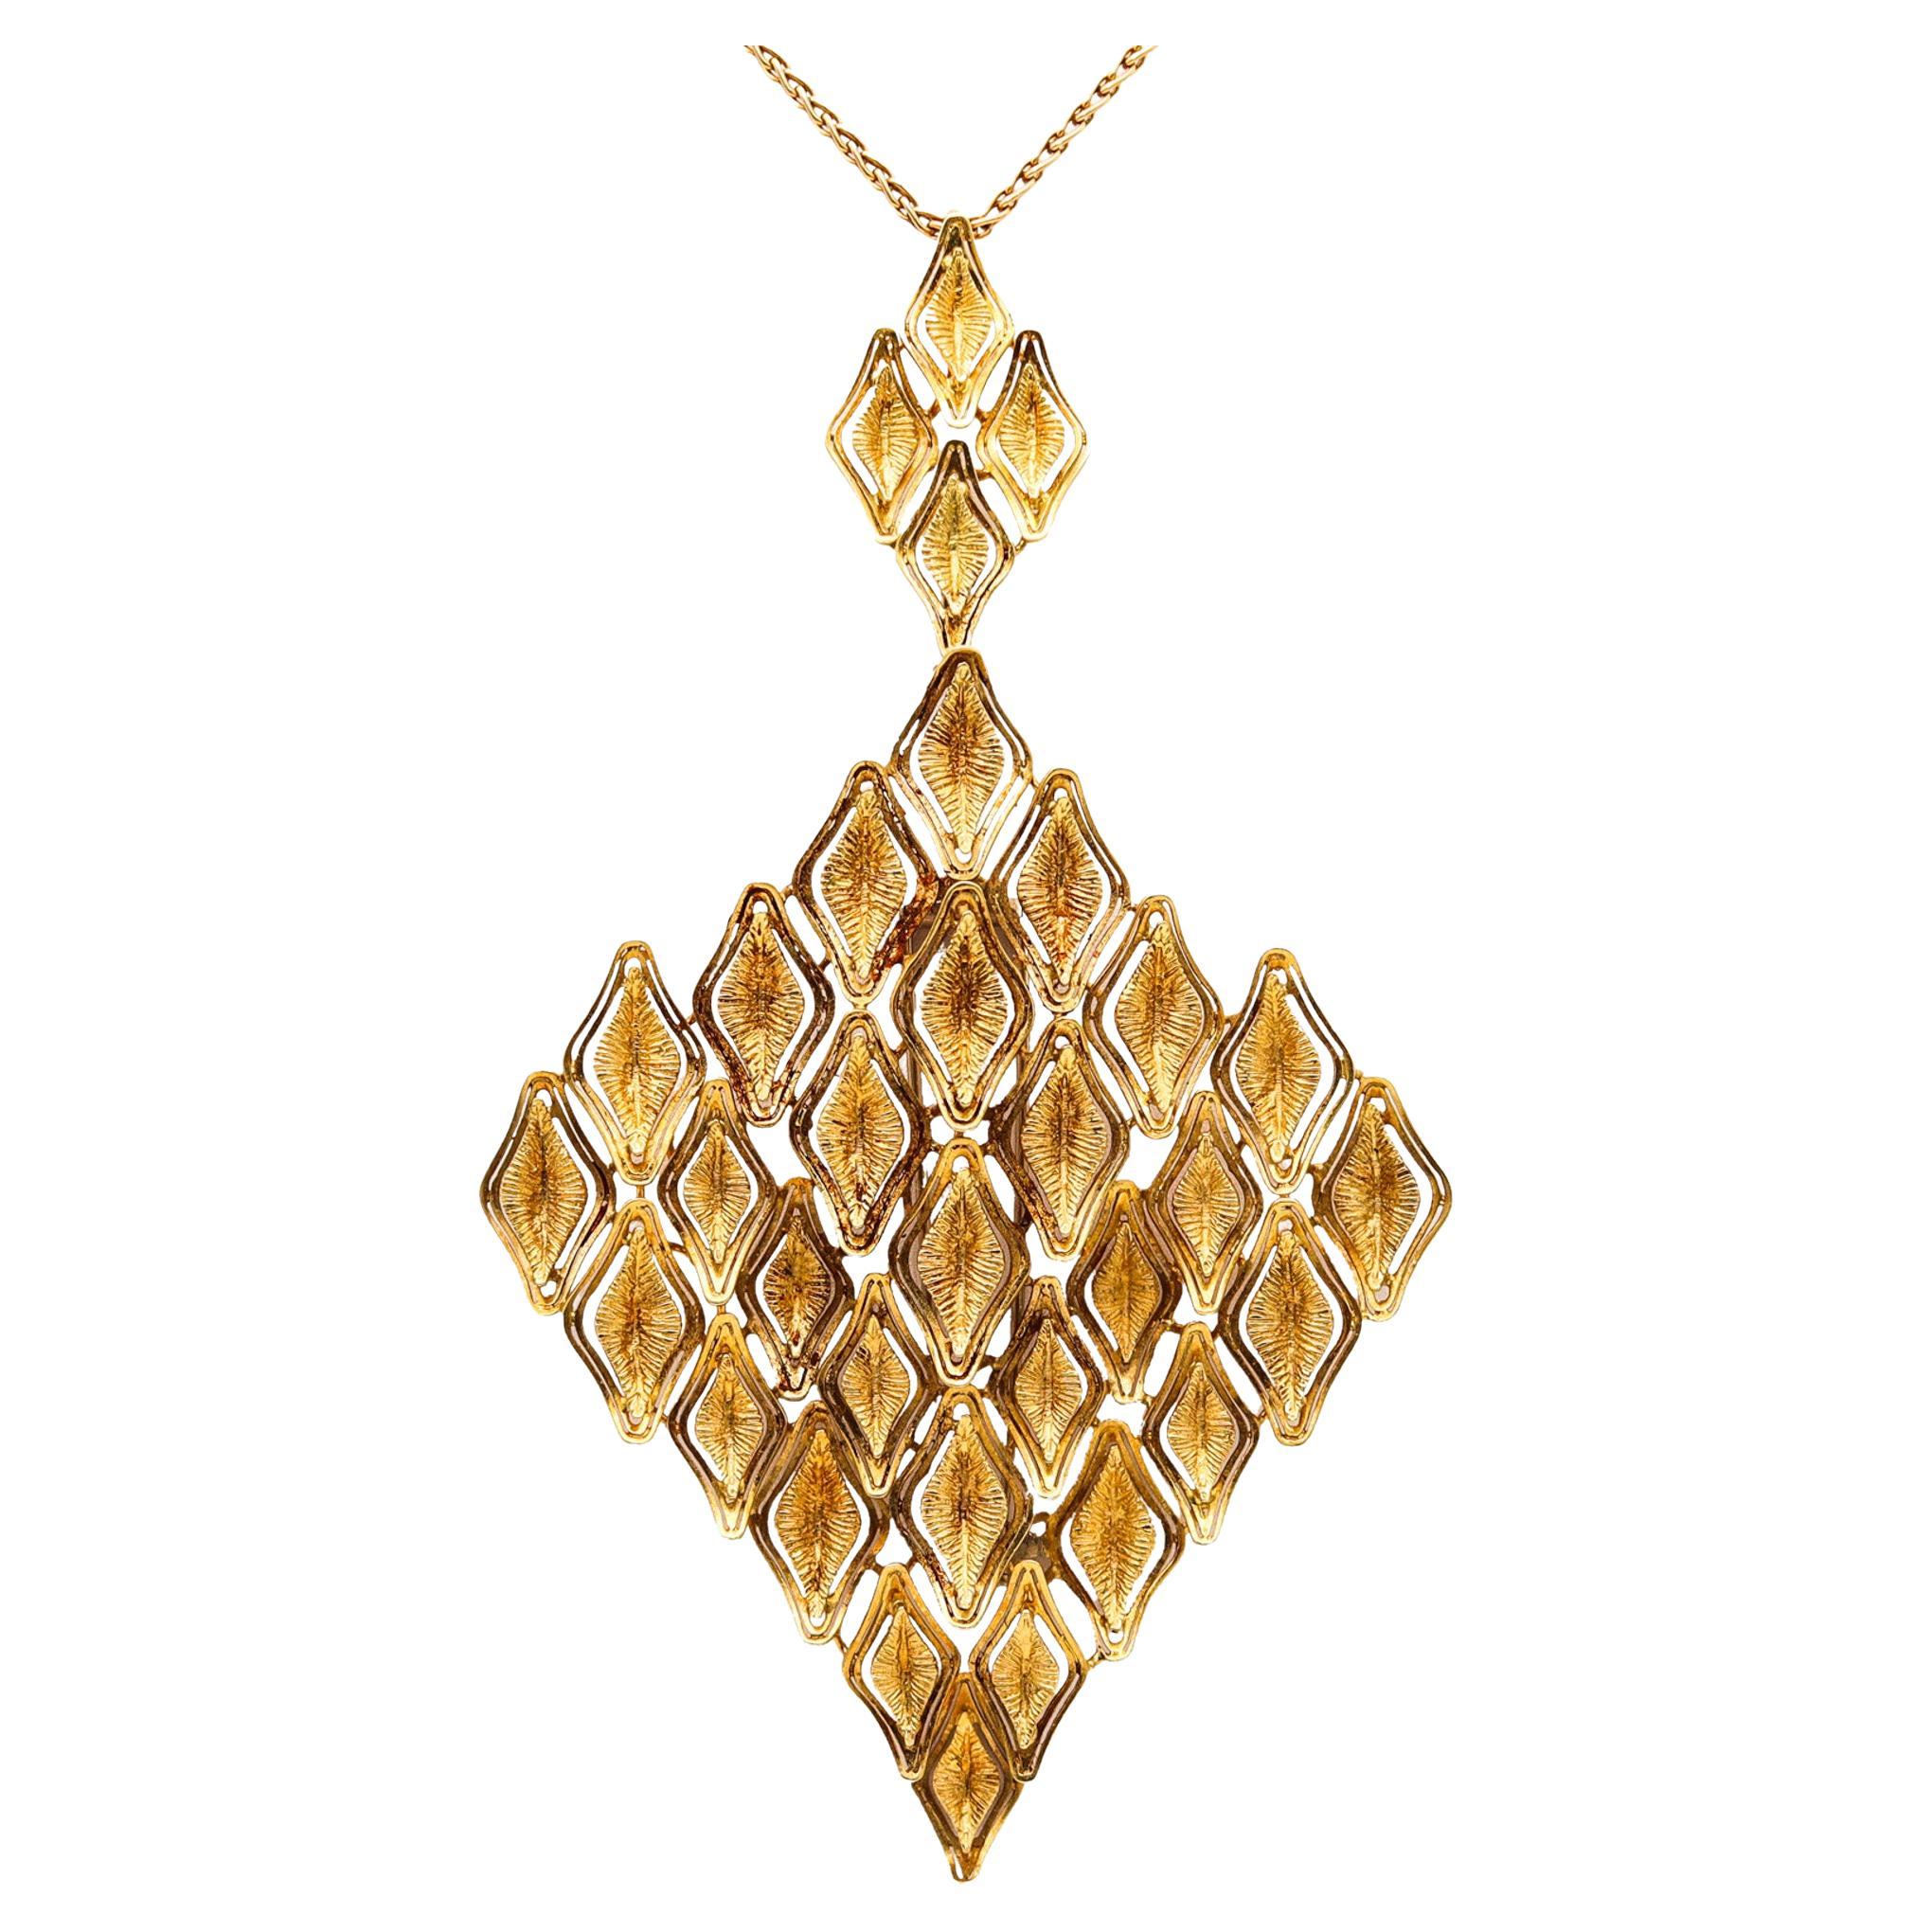 Spritzer & Furhmann 1960 Retro Modernist Large Pendant In Solid 18Kt Yellow Gold For Sale